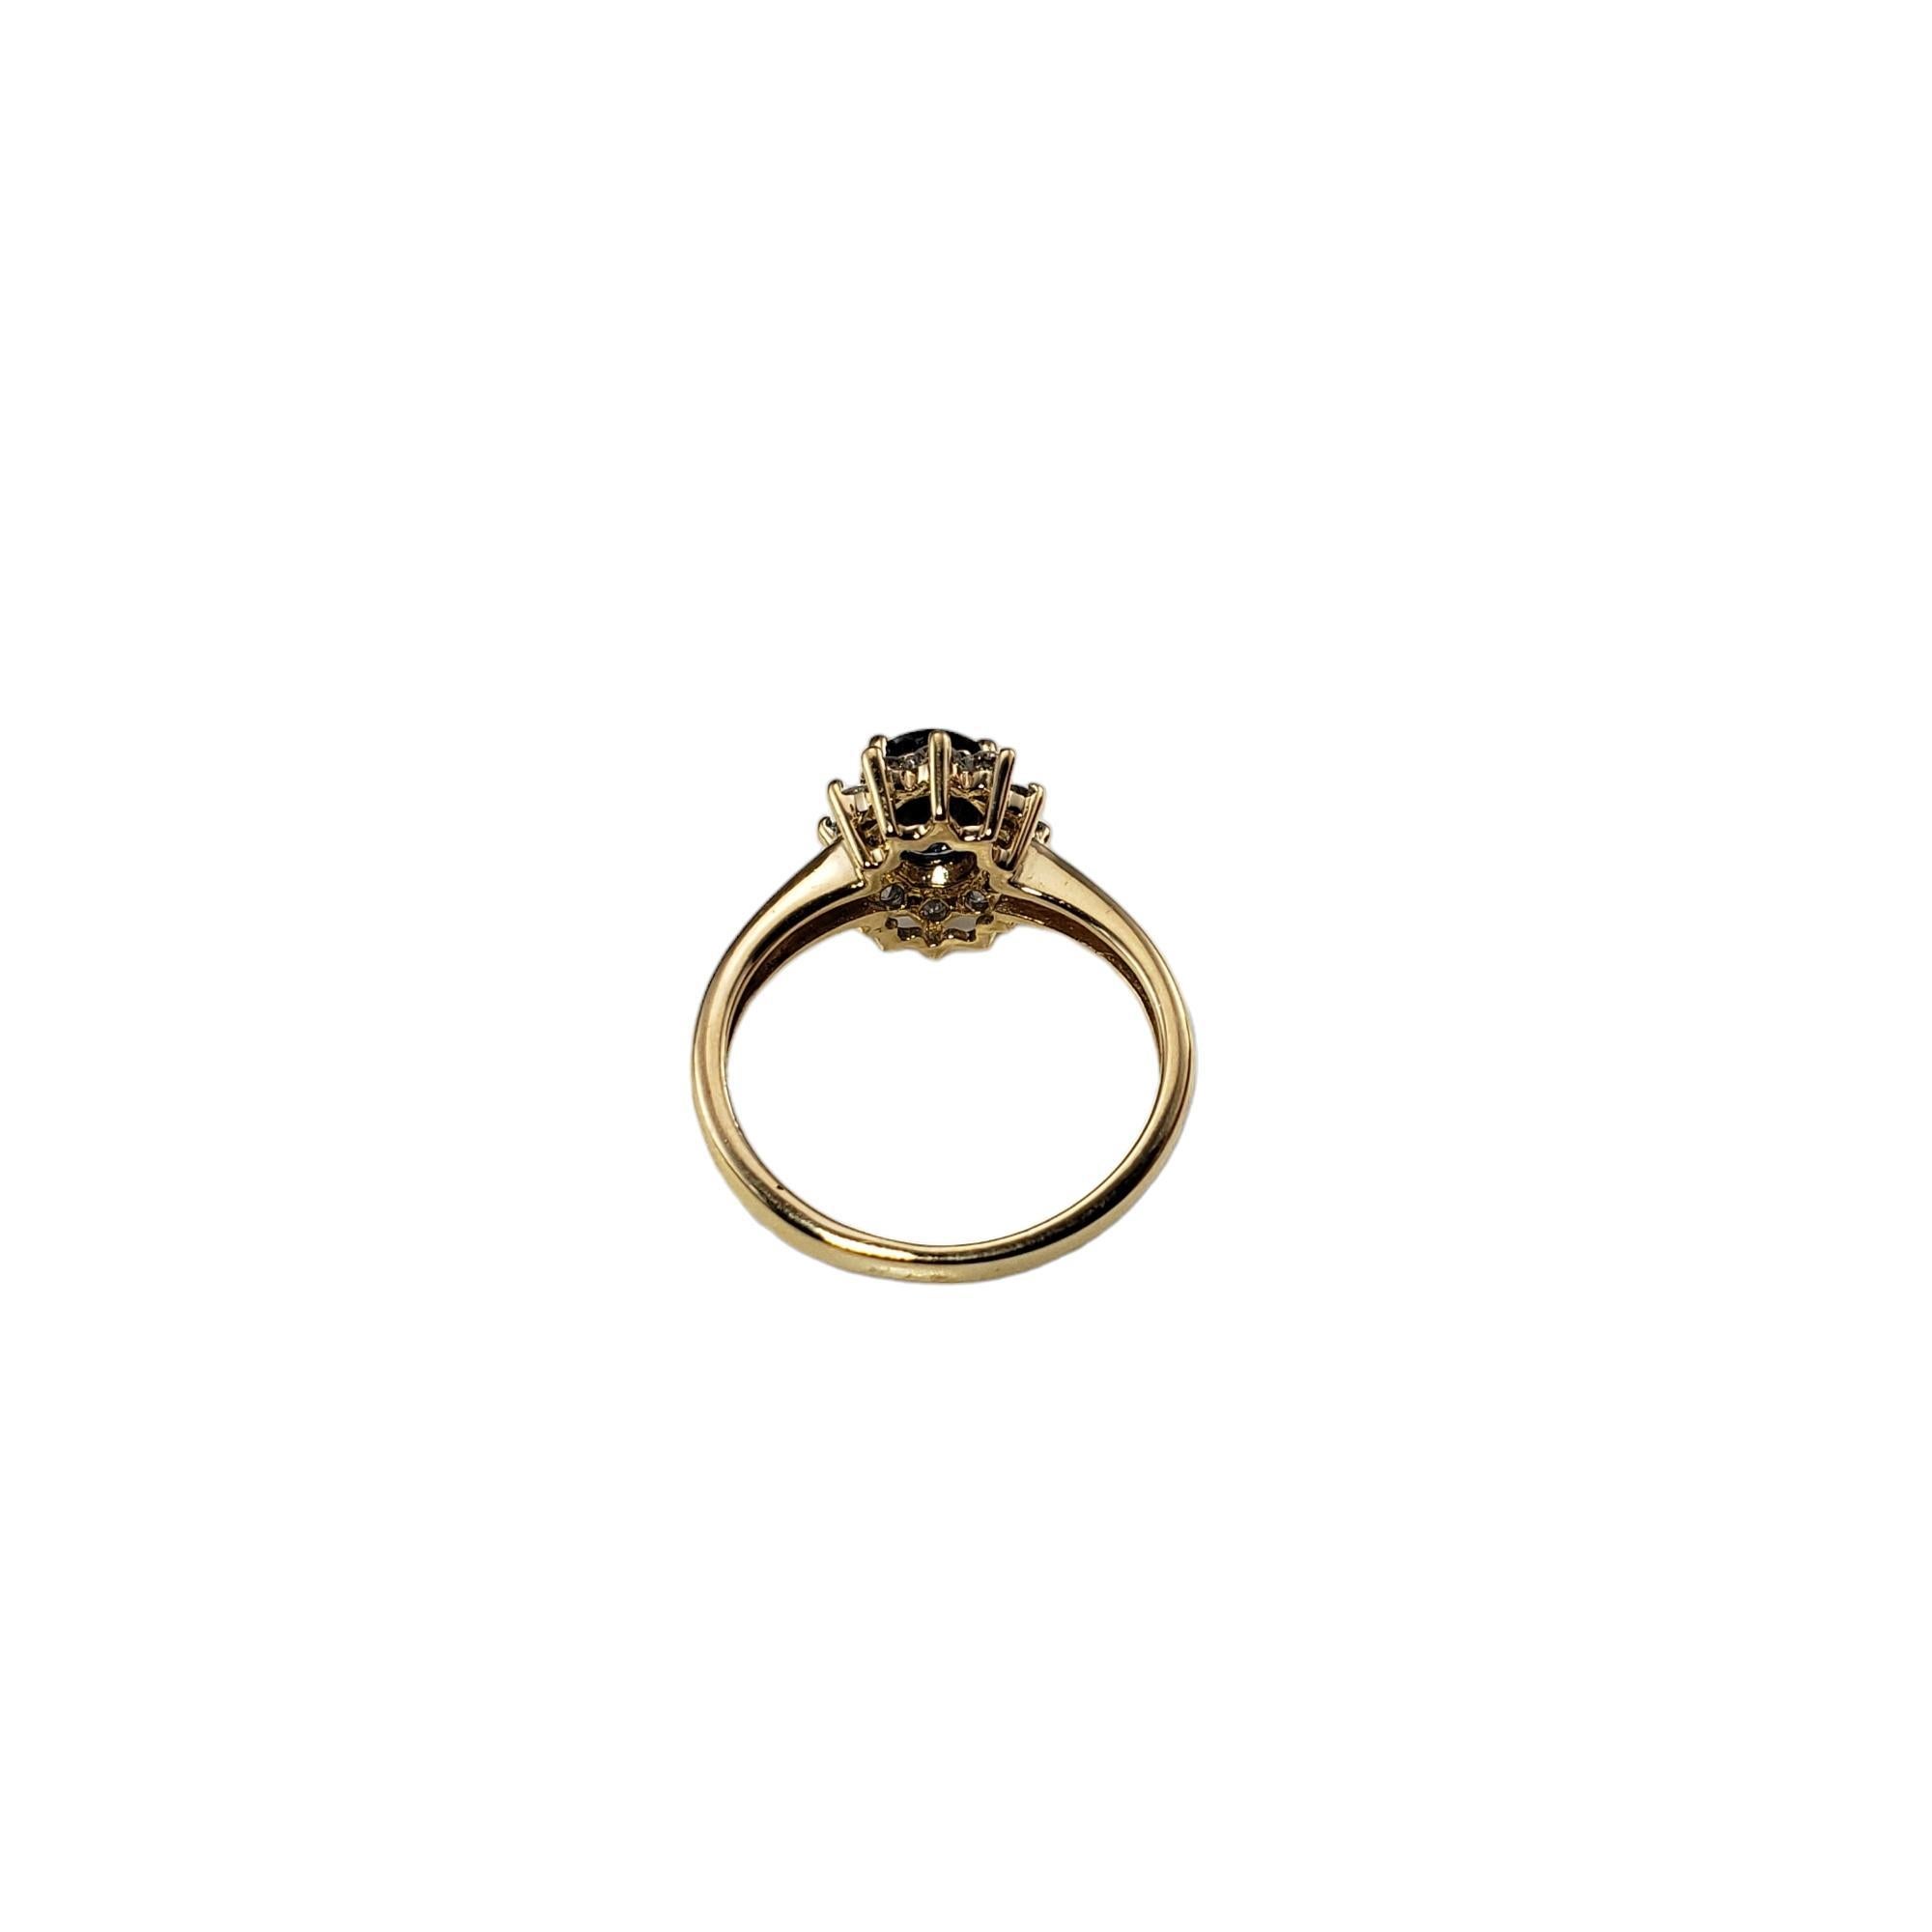 Women's 14K Yellow Gold Sapphire & Diamond Ring Size 5.25 #15745 For Sale